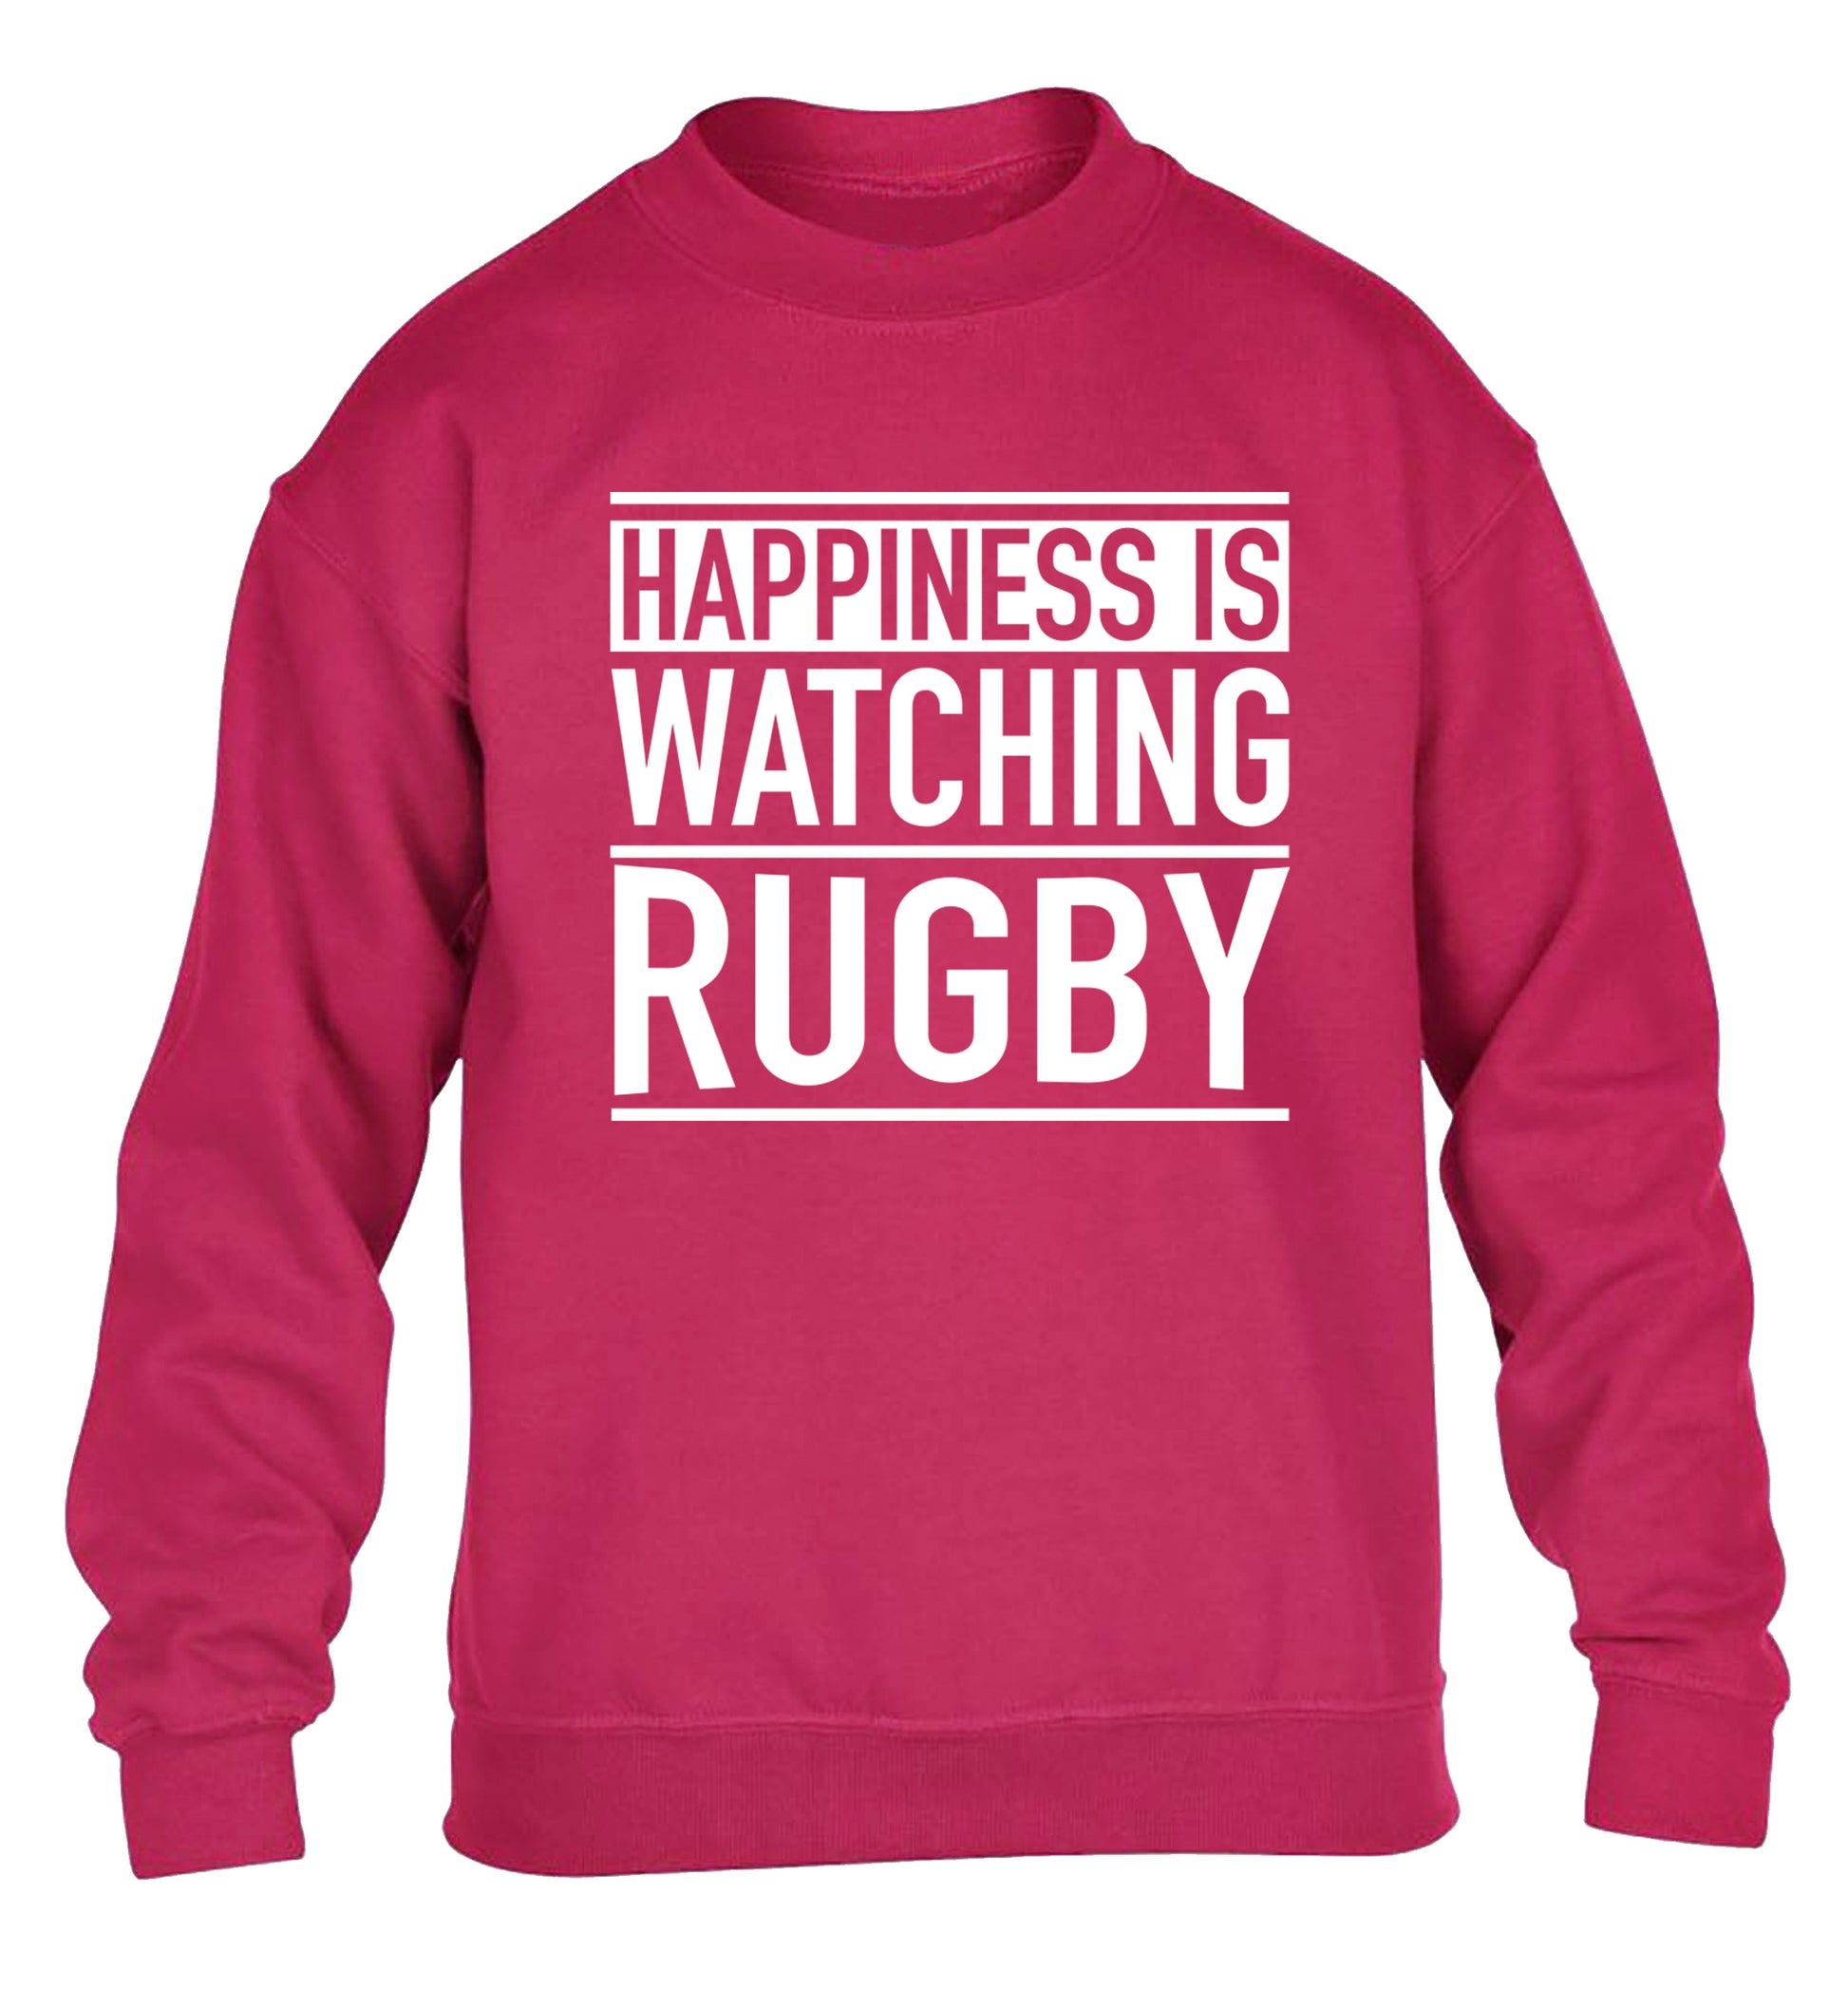 Happiness is watching rugby children's pink sweater 12-13 Years